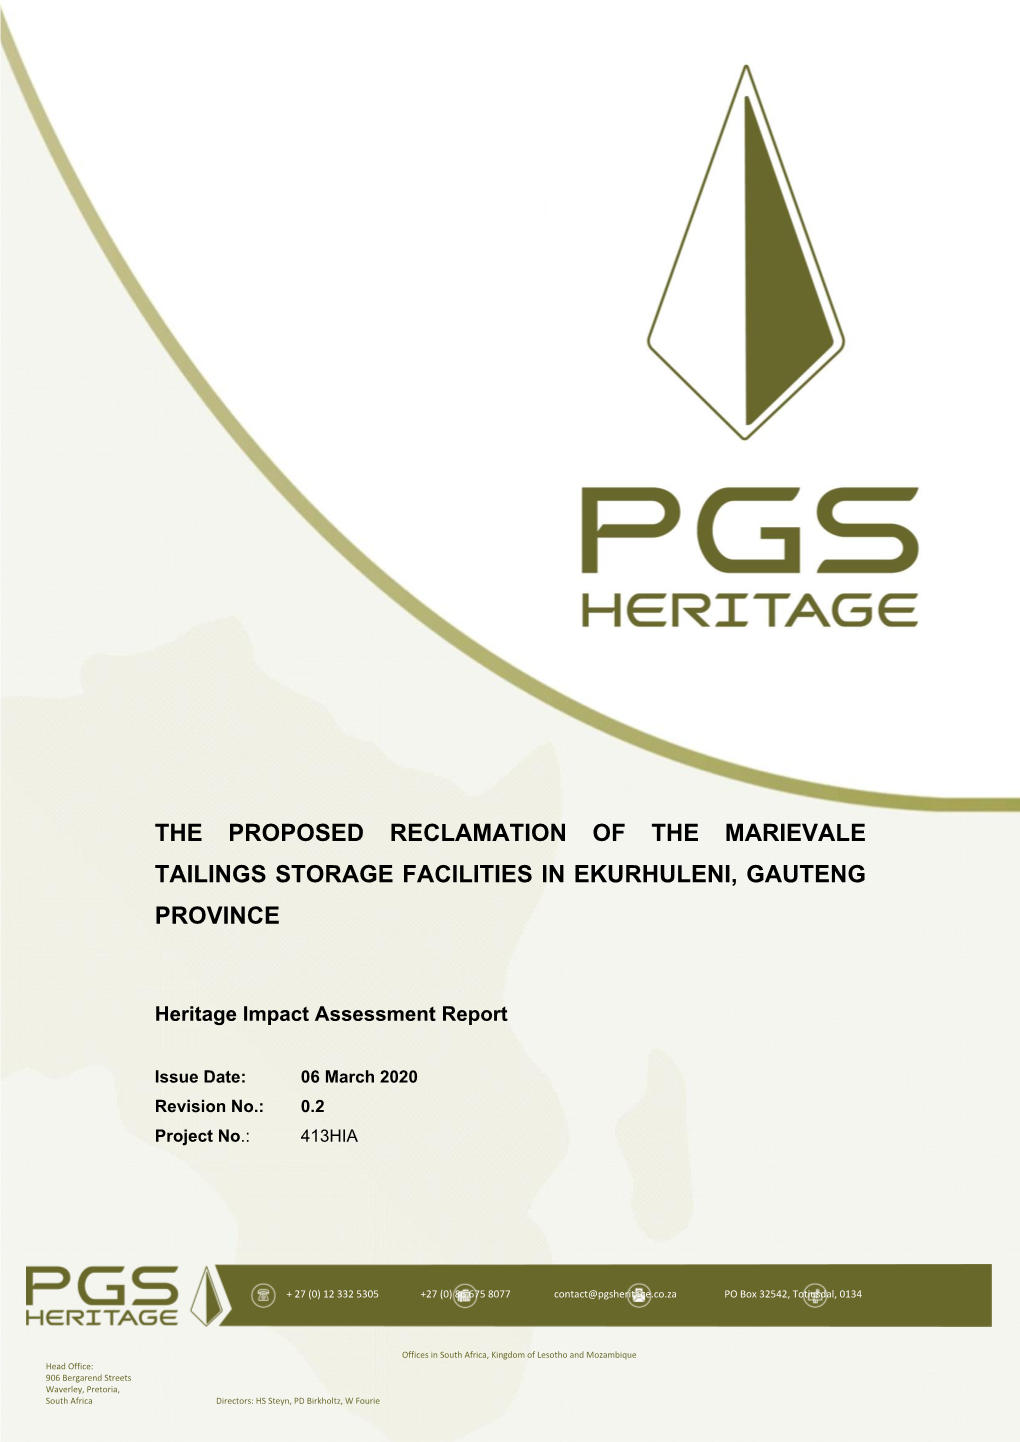 The Proposed Reclamation of the Marievale Tailings Storage Facilities in Ekurhuleni, Gauteng Province